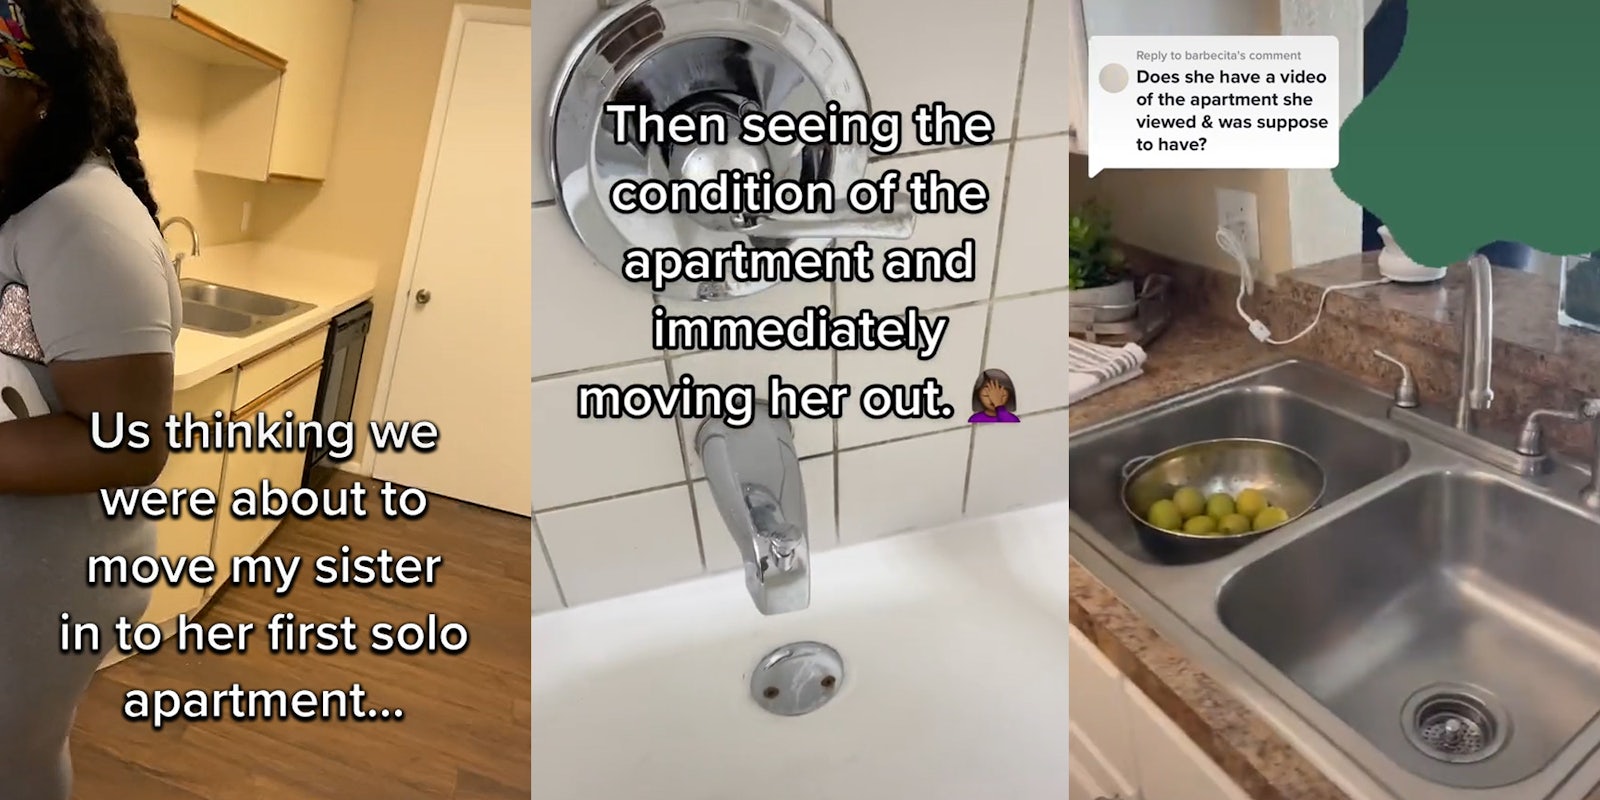 woman standing in empty apartment caption 'Us thinking we were about to move my sister in to her first solo apartment...' (l) bathtub faucet caption 'Then seeing the condition of the apartment and immediately moving her out.' (c) granite countertop sink different appearance from kitchen on left caption 'Does she have a video of the apartment she viewed & was spposed to have?' (r)